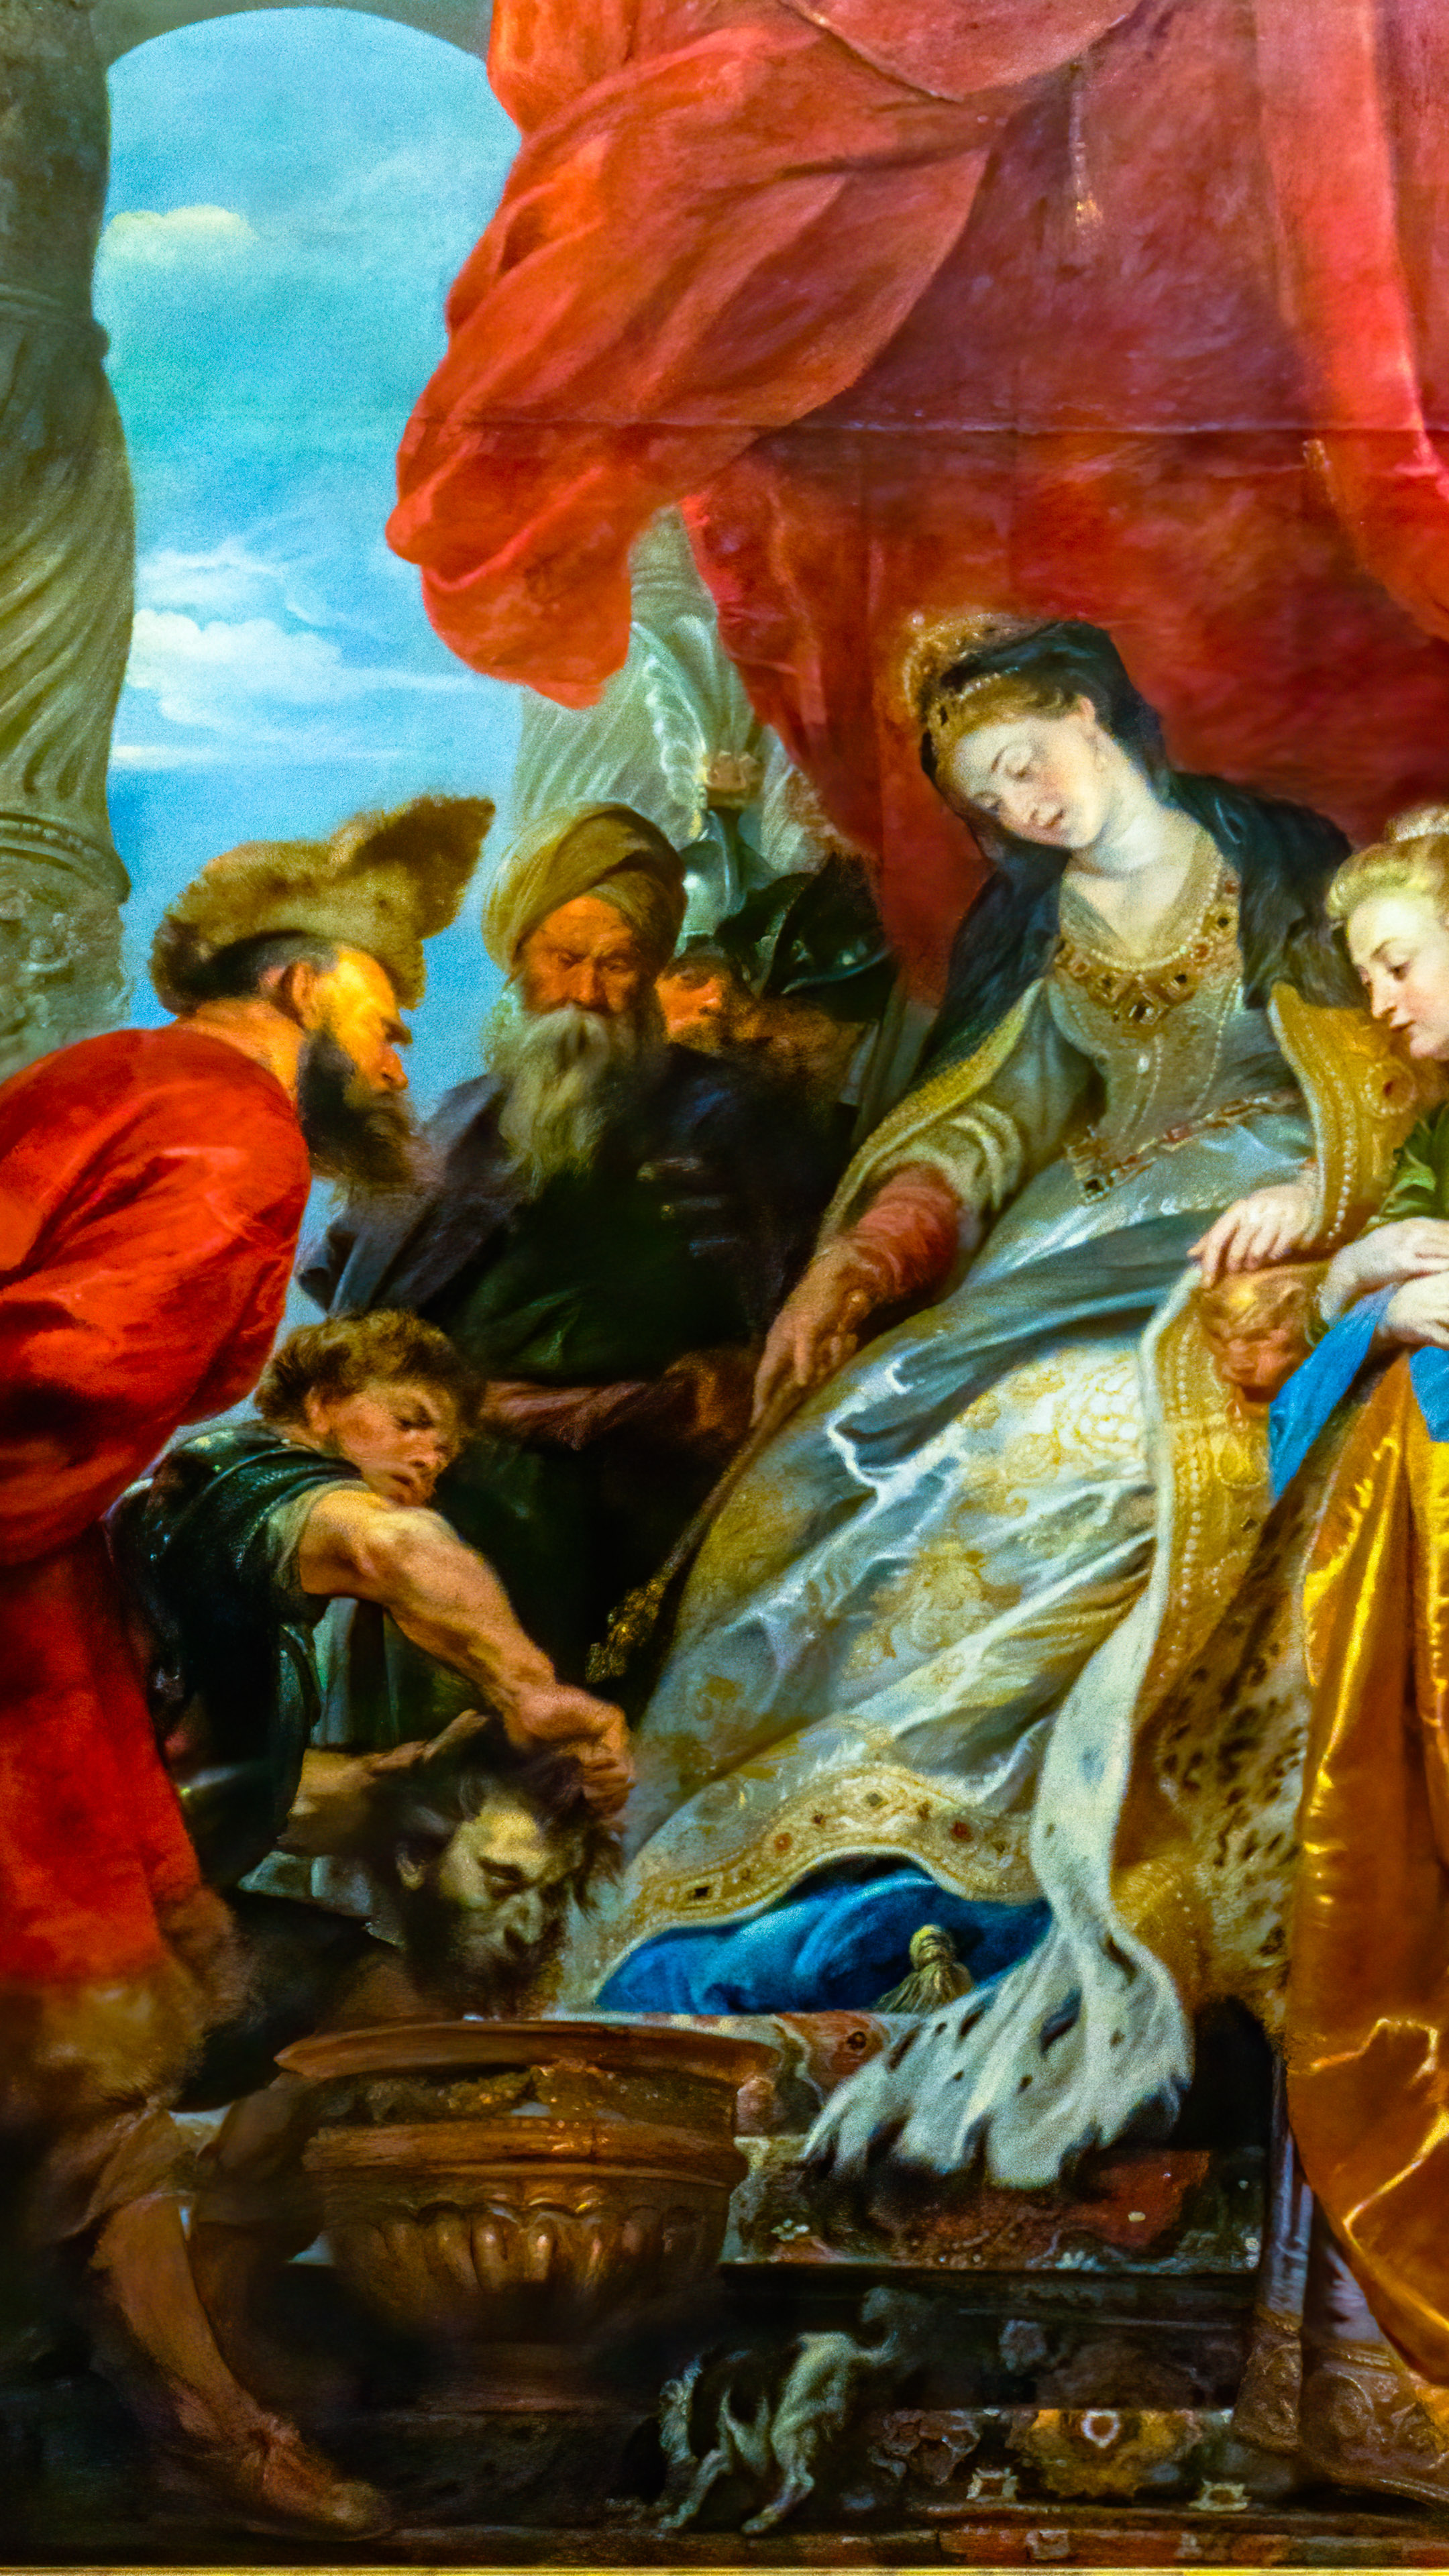 Marvel at the Baroque grandeur as Rubens' timeless works adorn your digital devices.